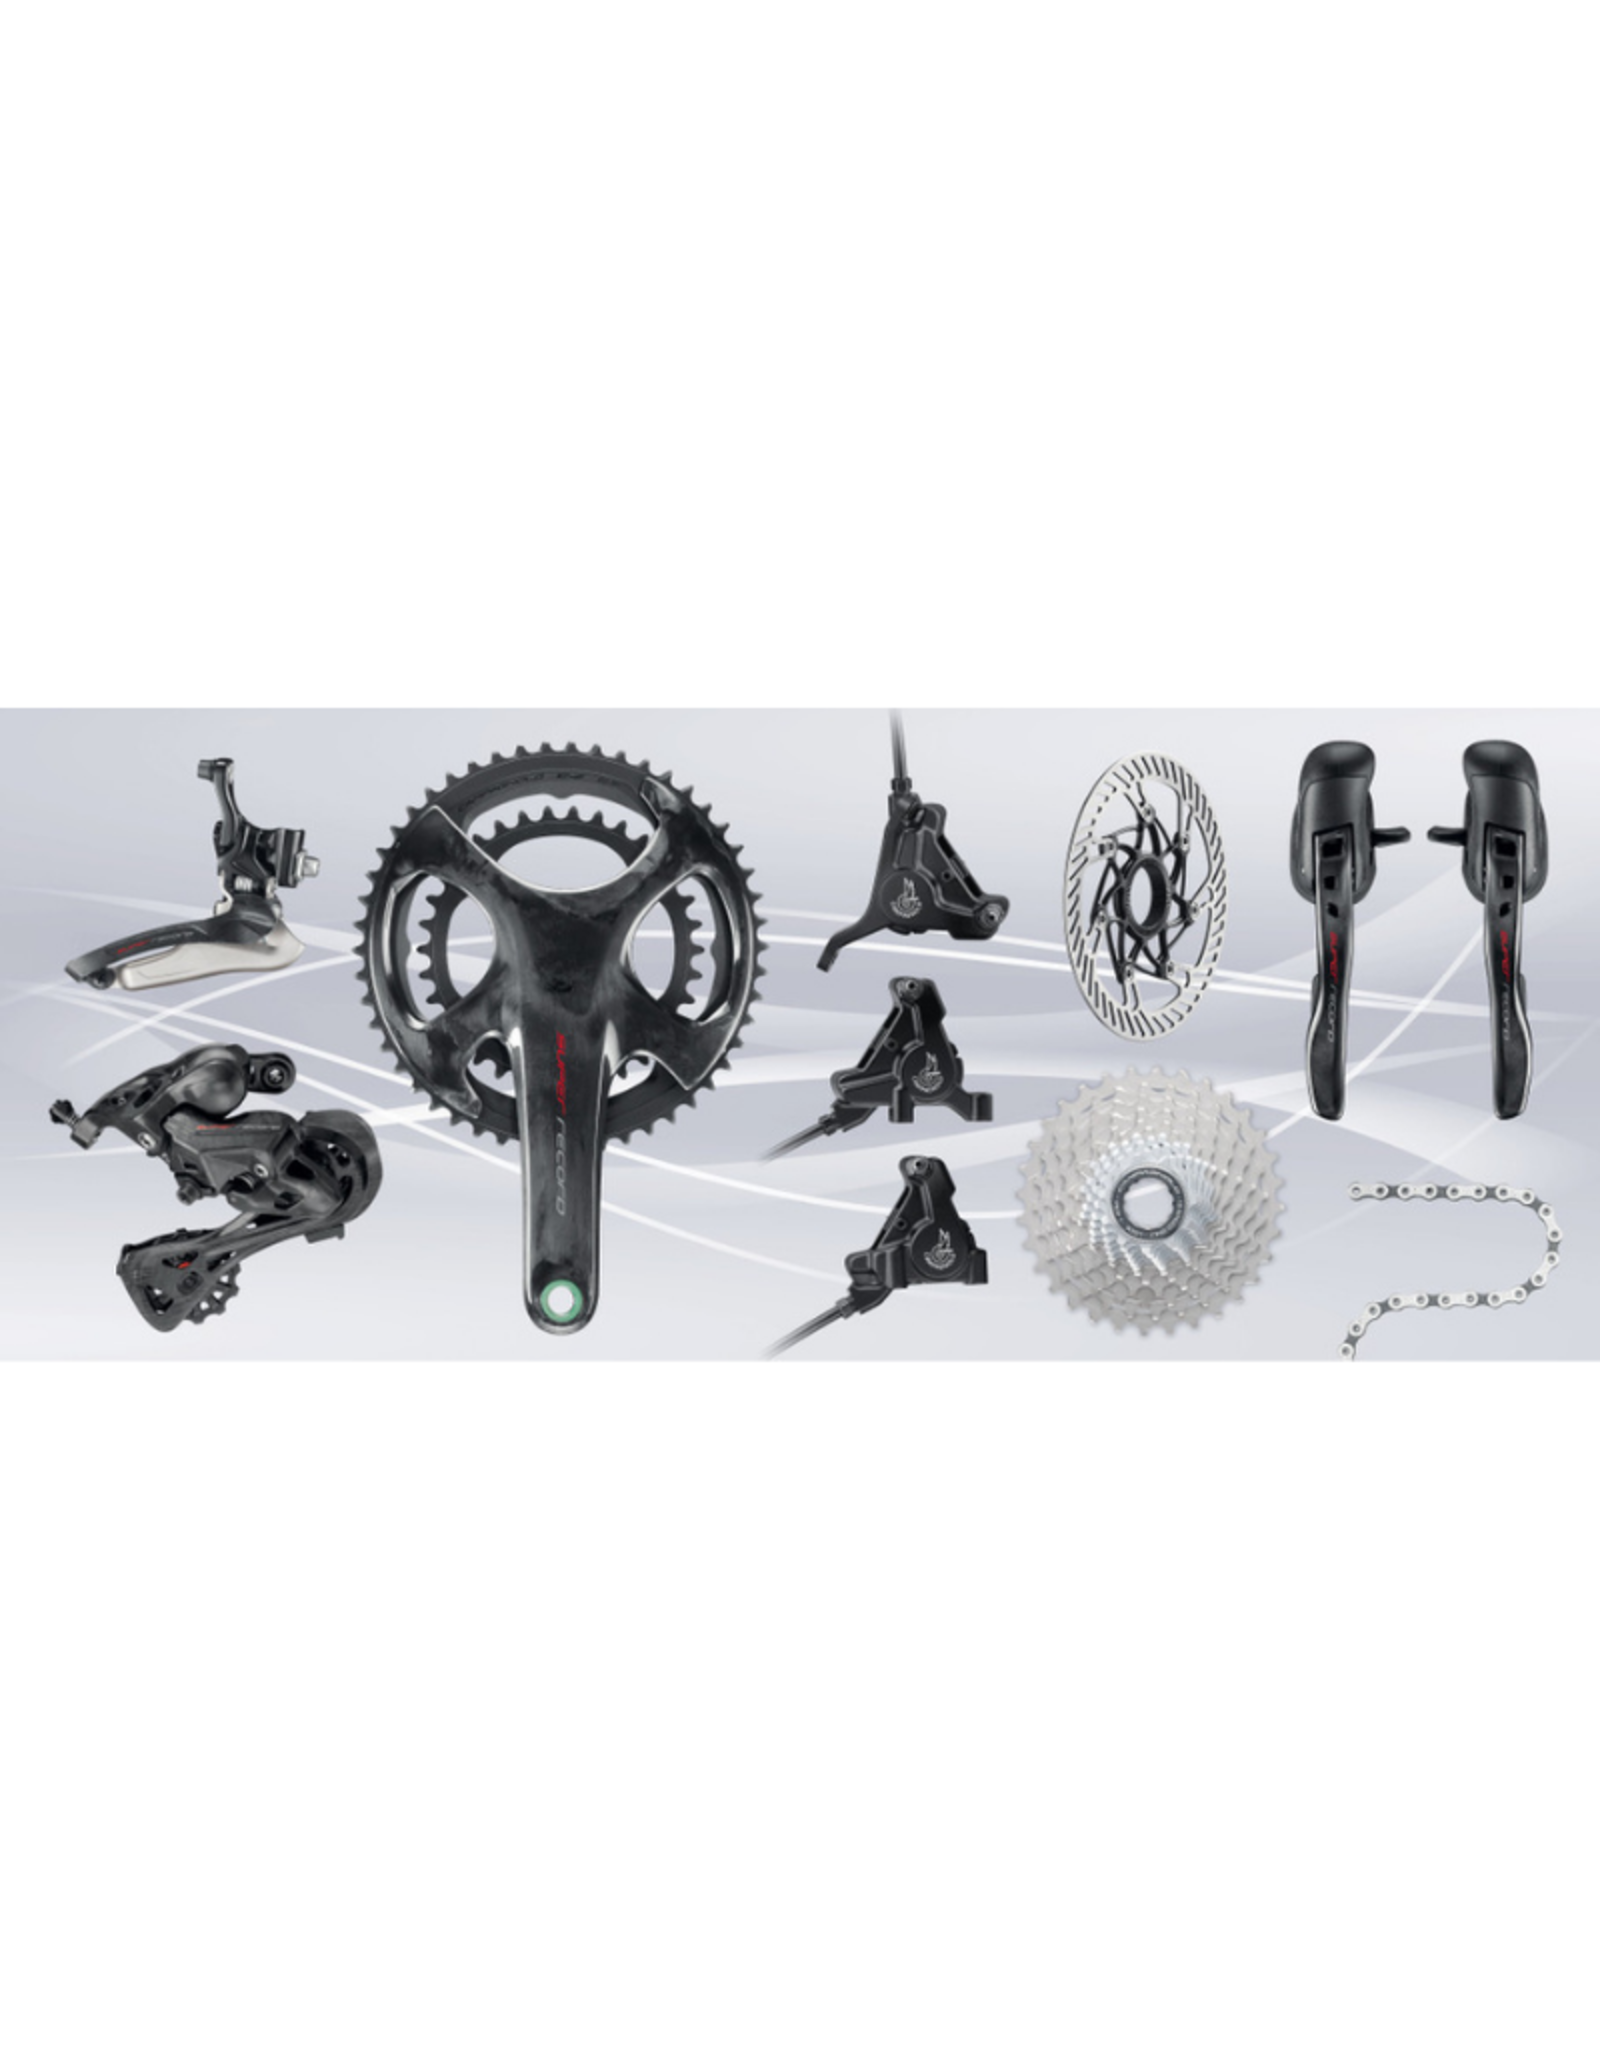 Campagnolo Super Record 12spd Mechanical/Hydro Groupset